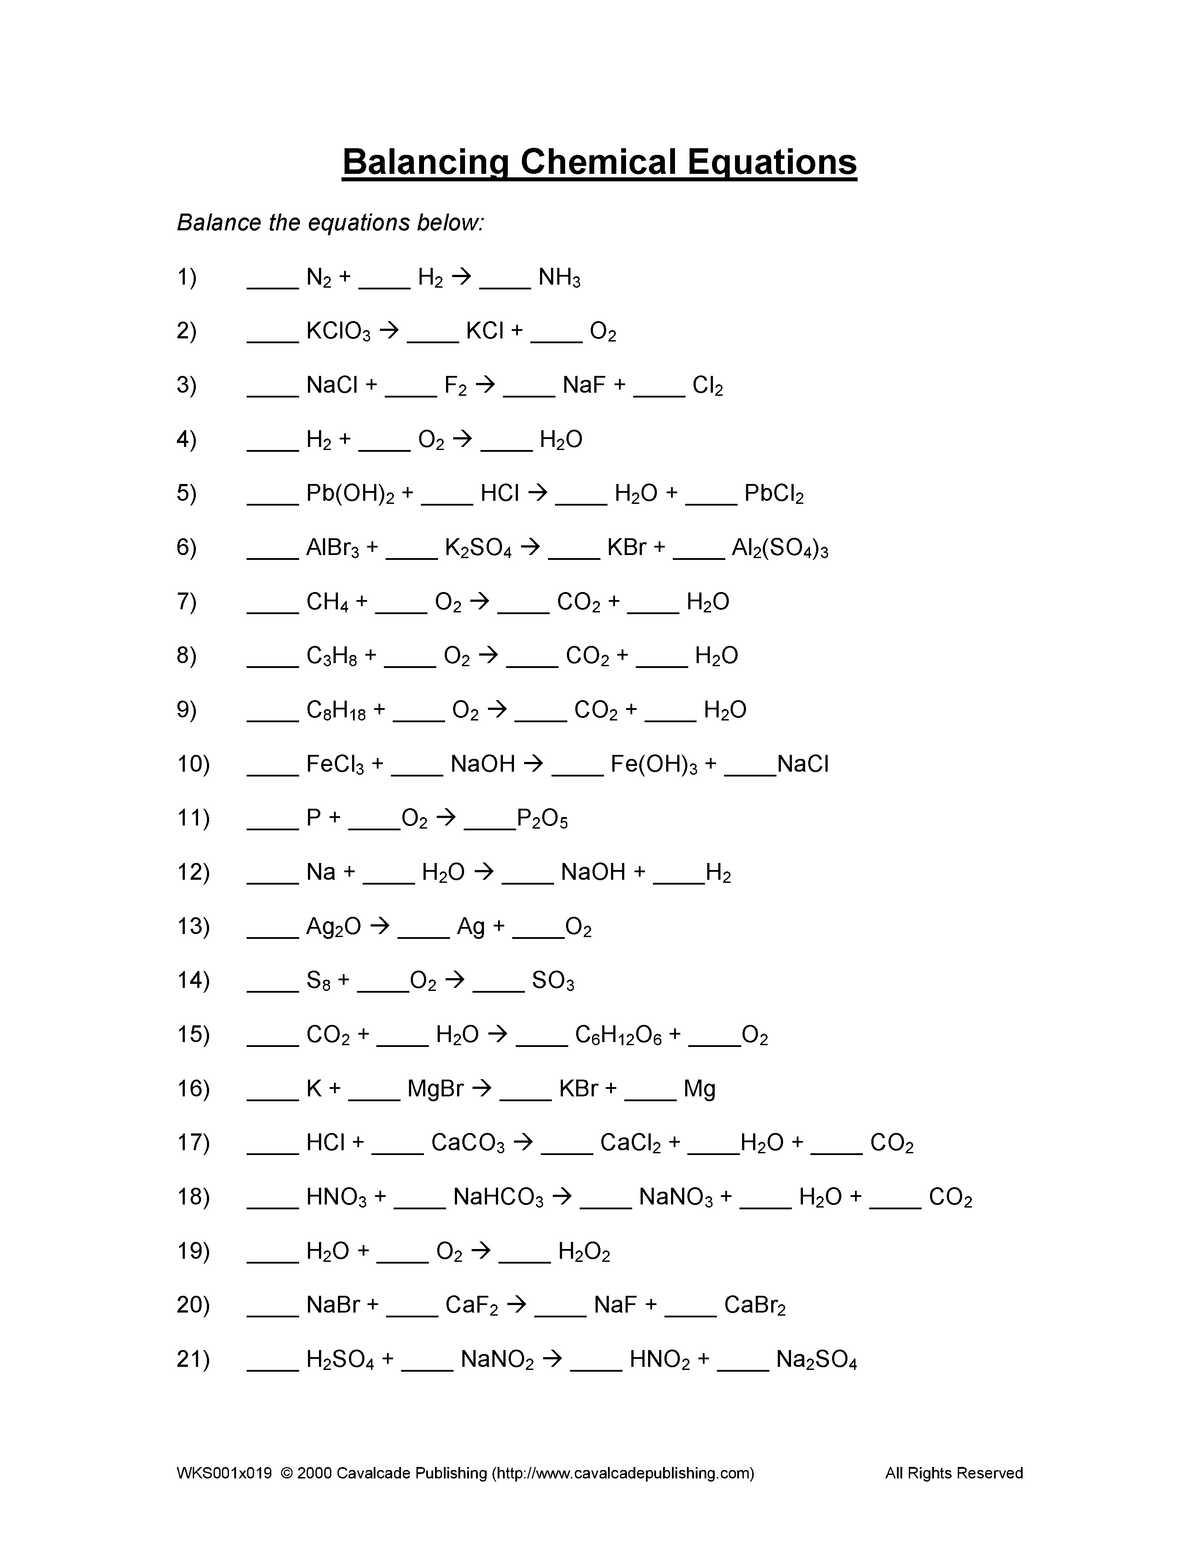 Balancing Equations Practice Worksheet Chemistry - CHEM 22 - StuDocu Intended For Balancing Equations Worksheet Answers